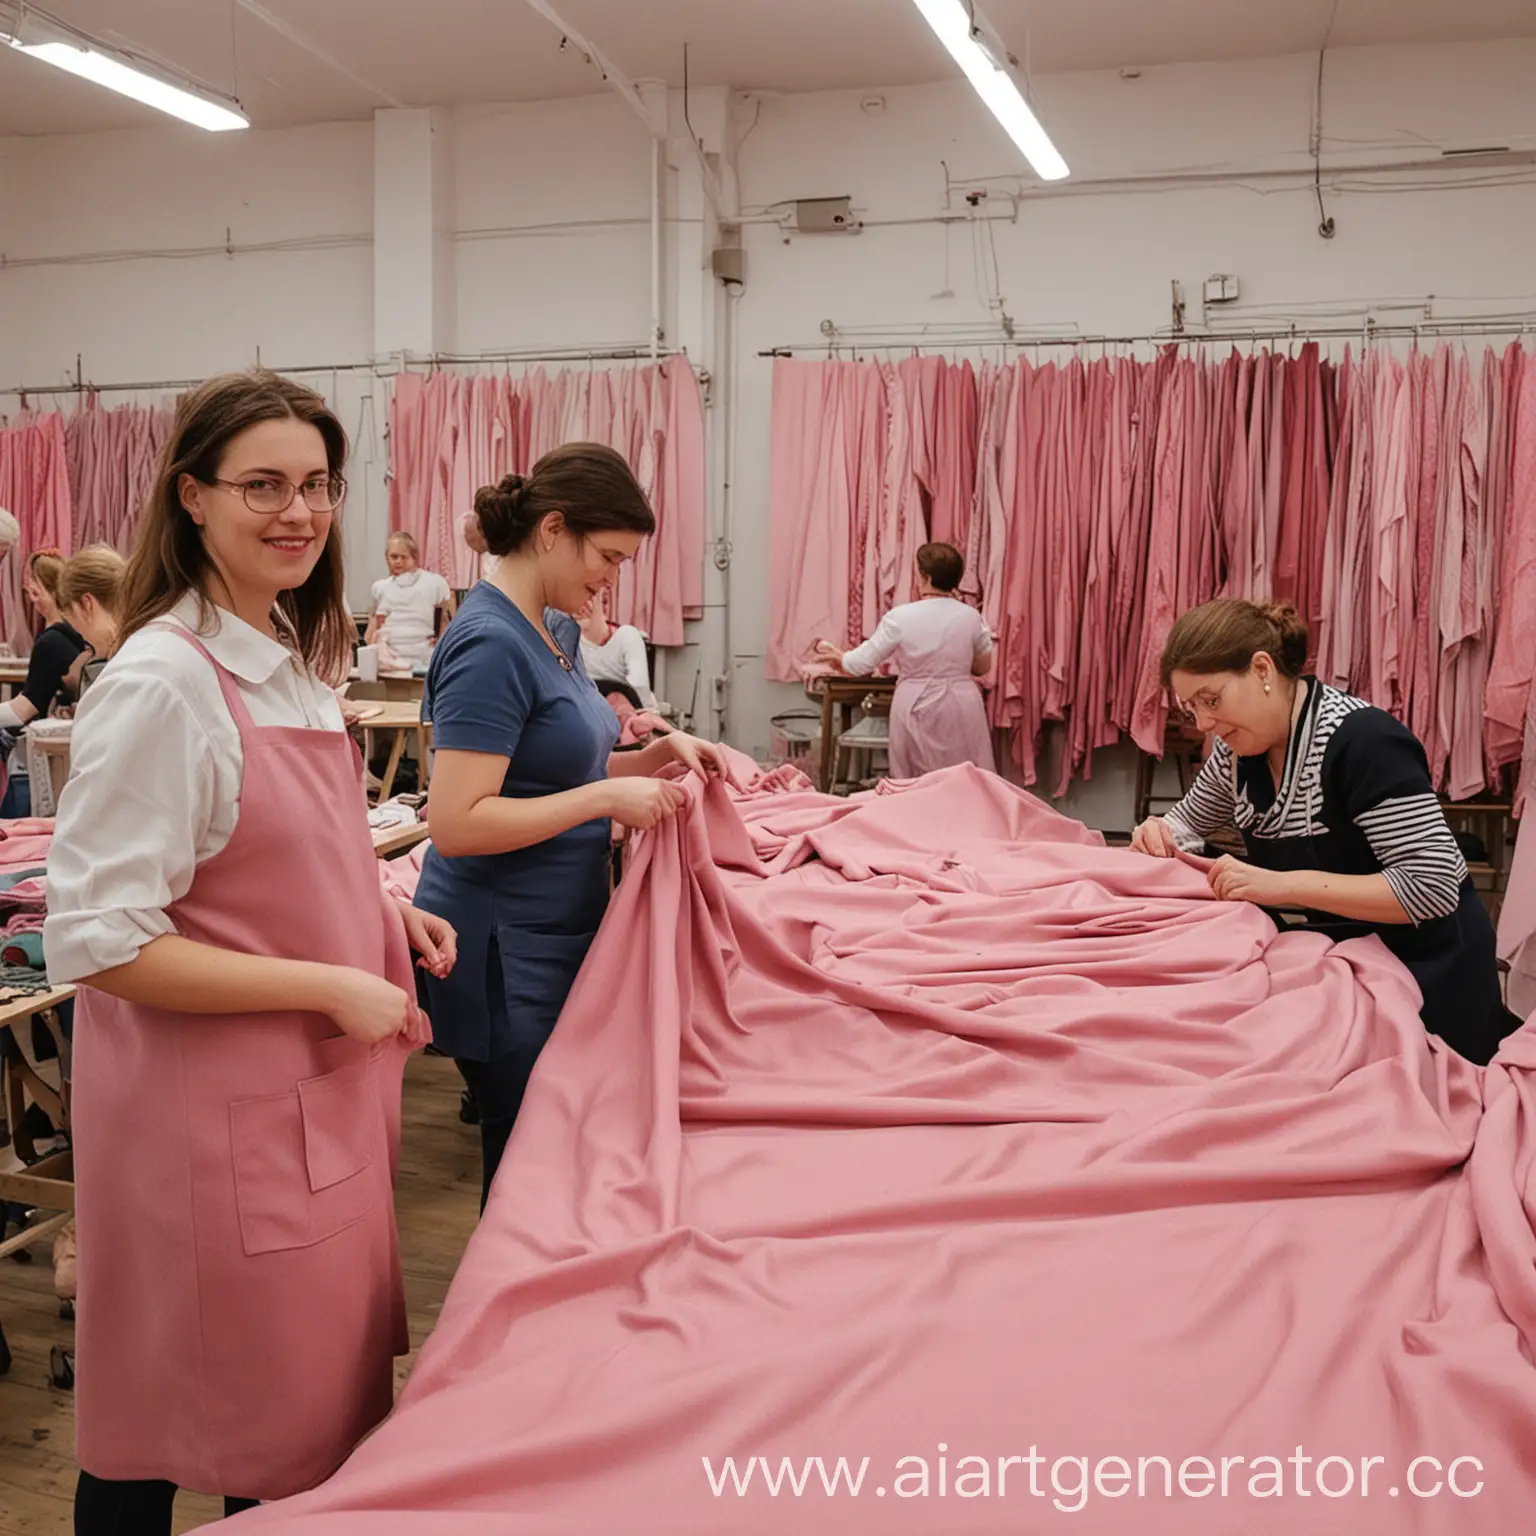 People-Crafting-in-a-Pink-Fabric-Workshop